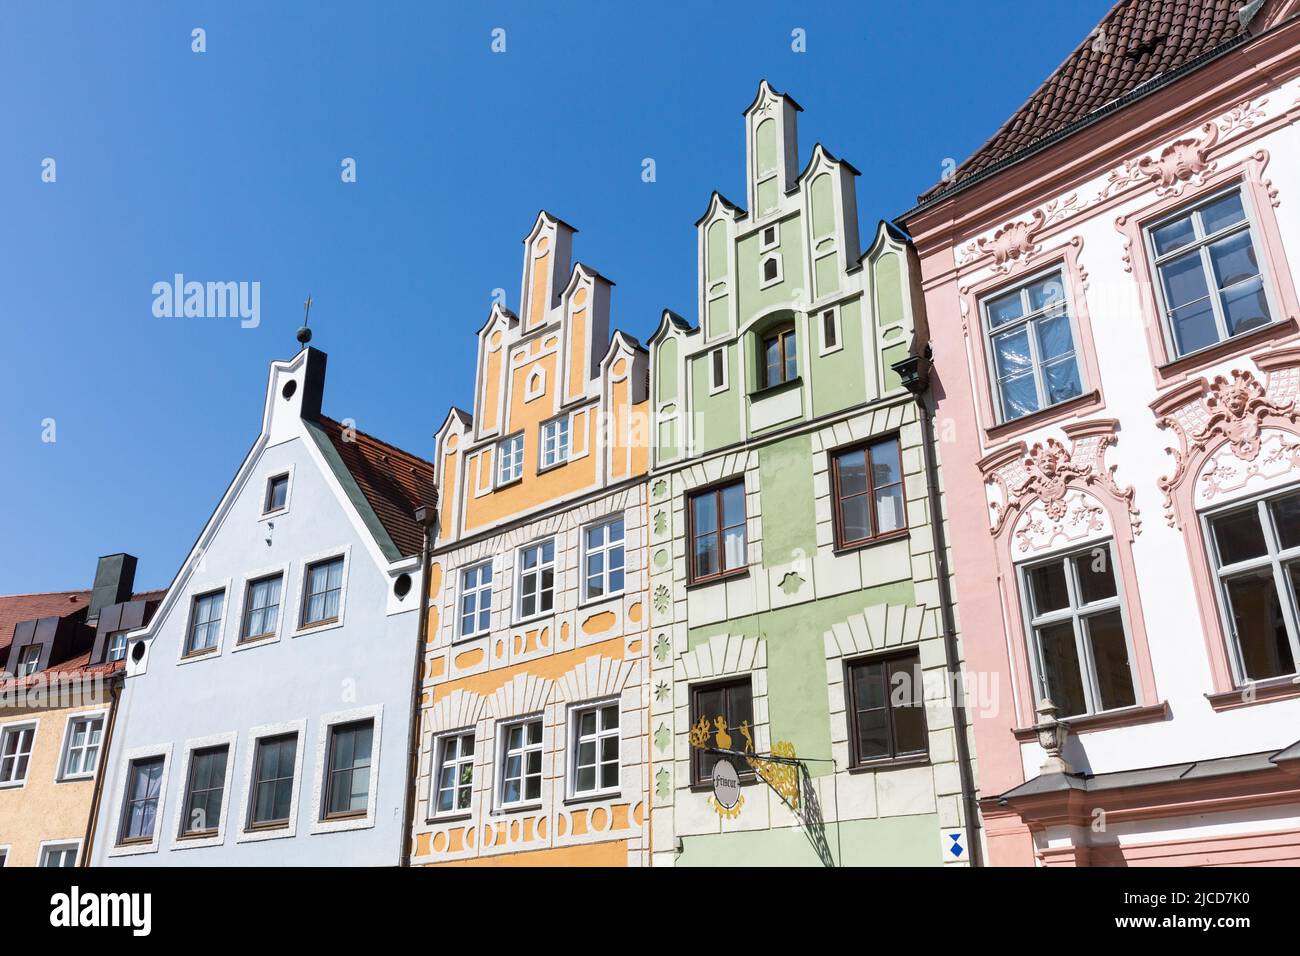 Landshut, Germany - Aug 14, 2021: Facades of historical houses in the old town of Landshut (Ländgasse). Stock Photo